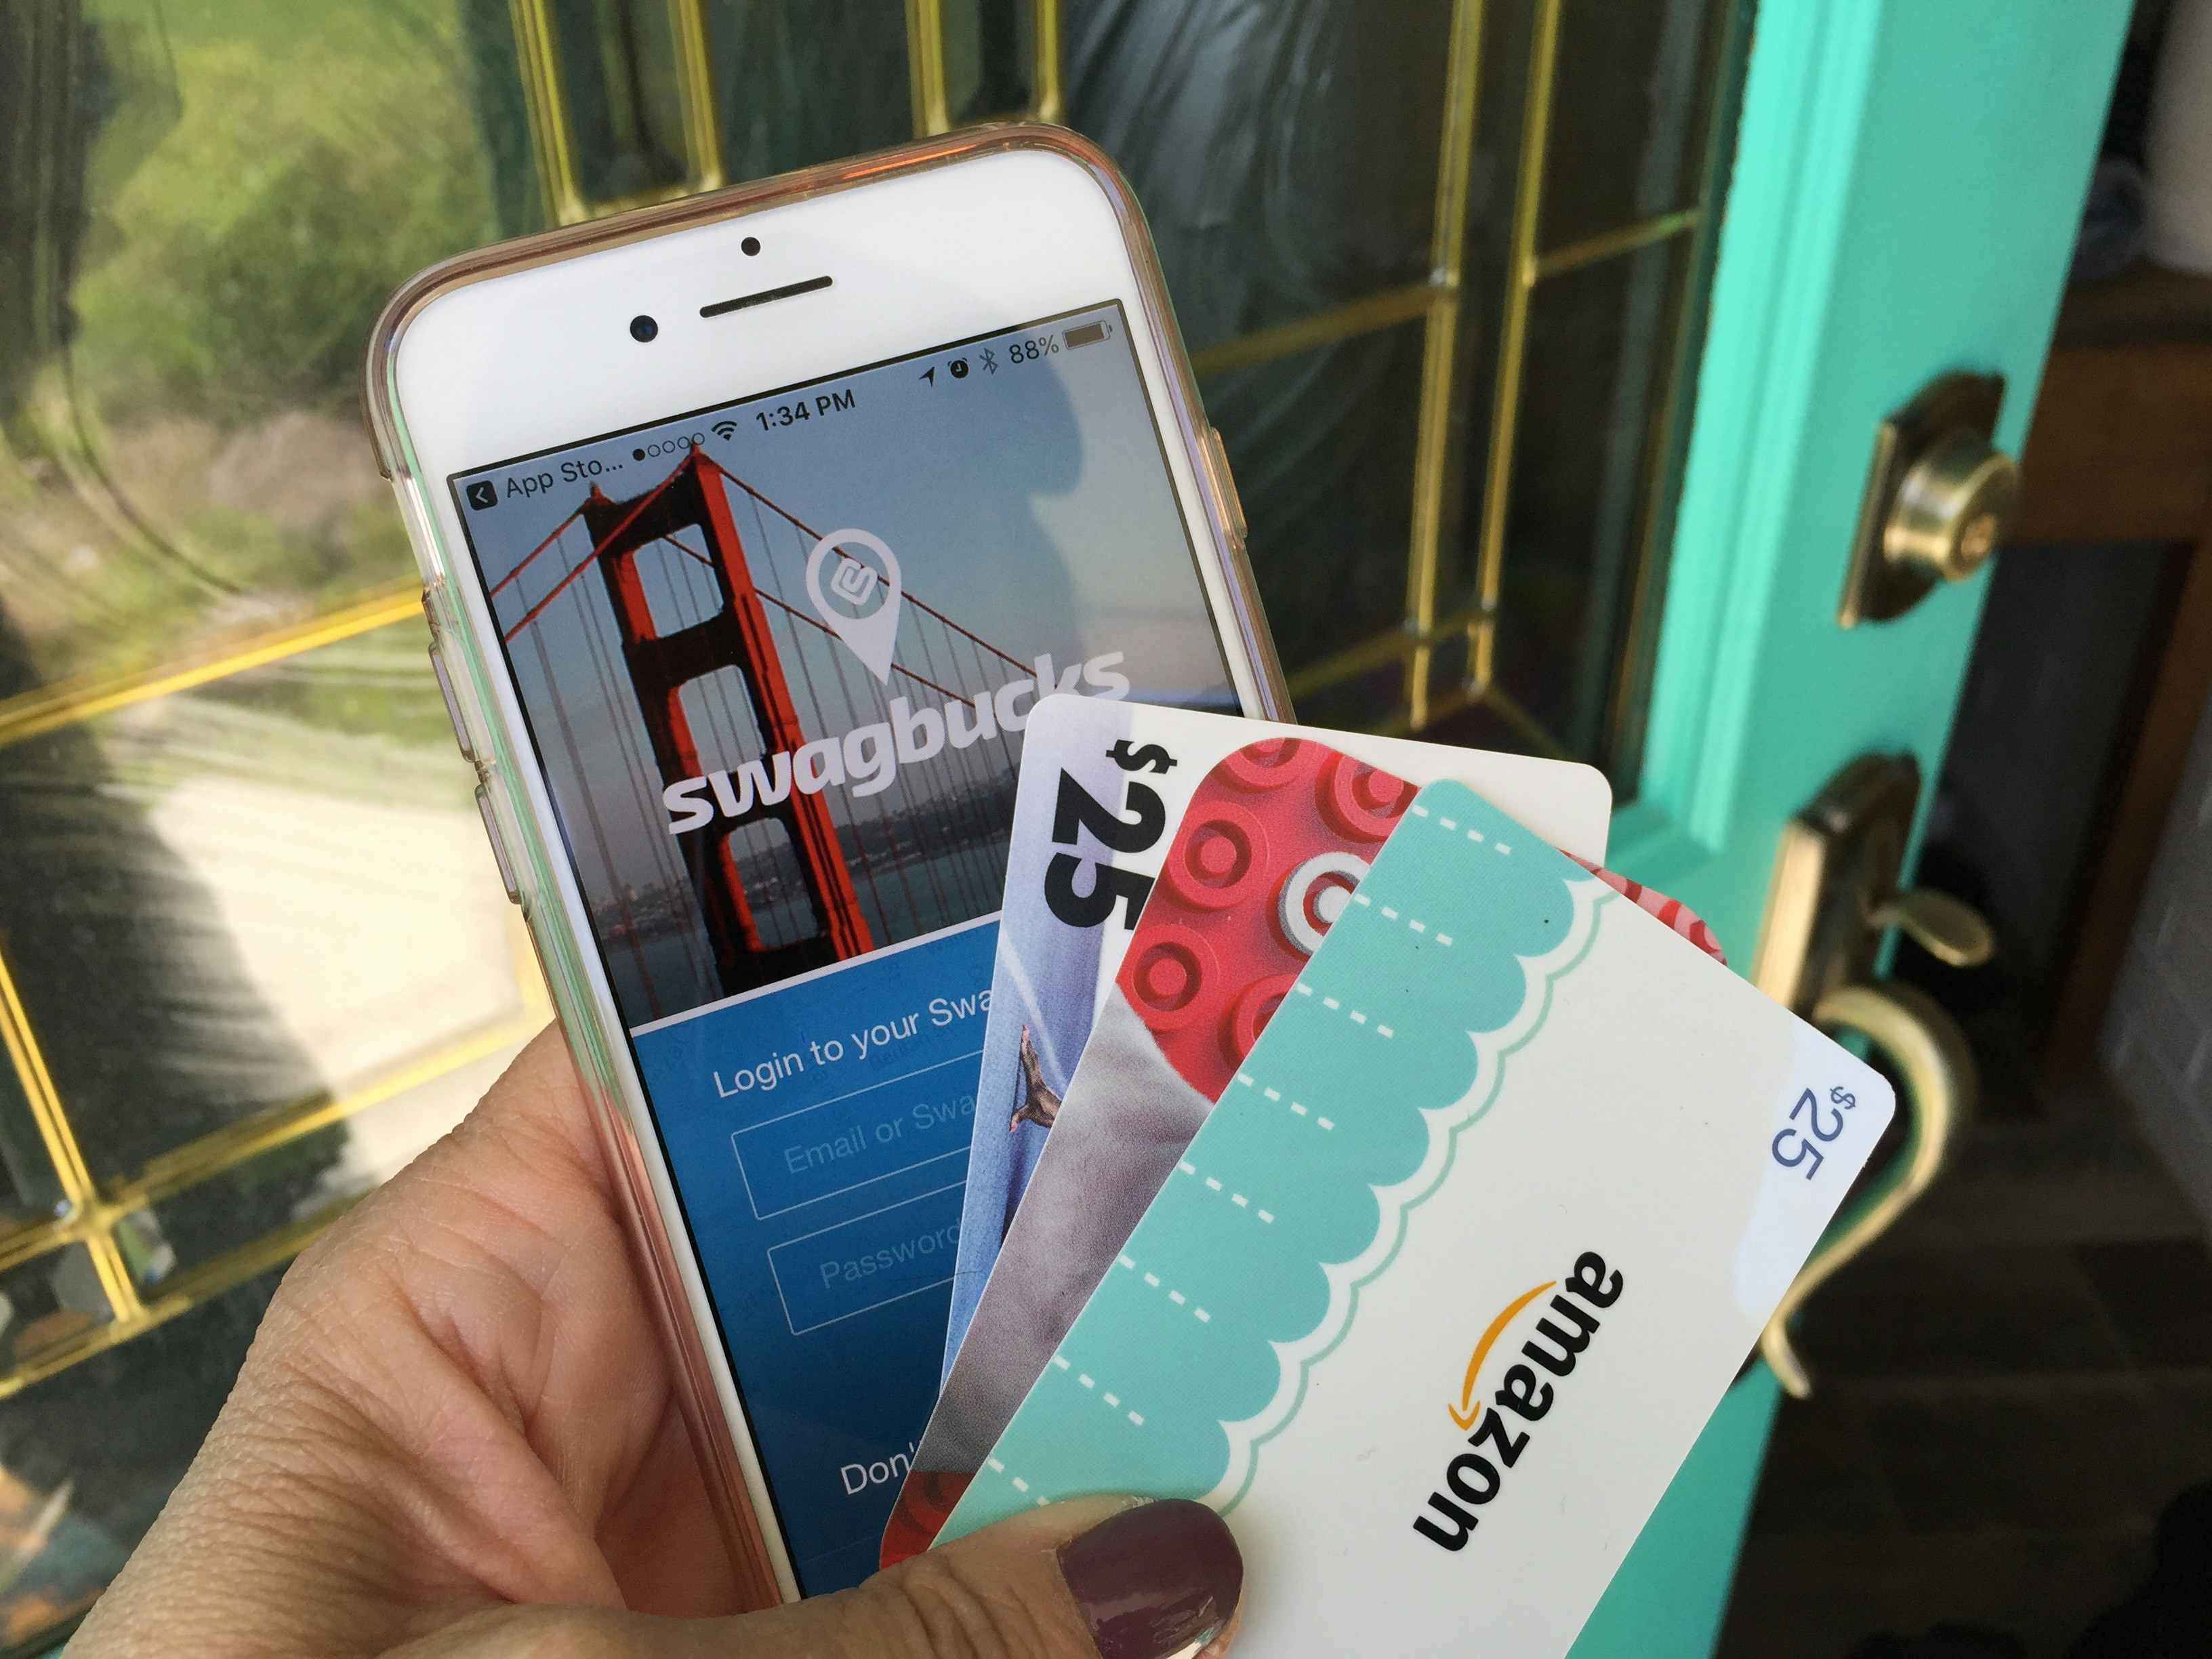 A person's hand holding an iPhone displaying the Swagbucks mobile app, a gift card for $25, a target gift card, and an Amazon gift card for $25, in front of an open door.